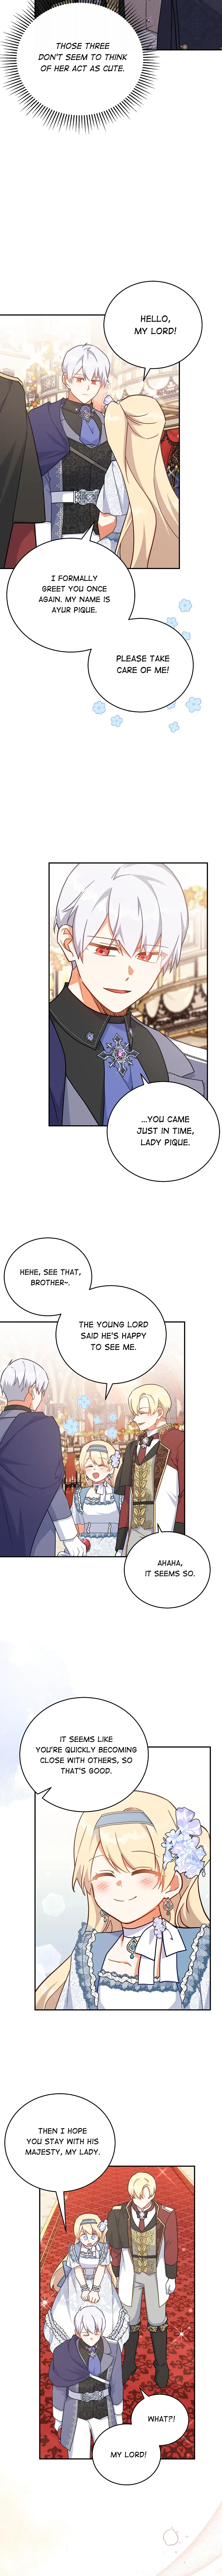 The Little Lord Who Makes Flowers Bloom chapter 41